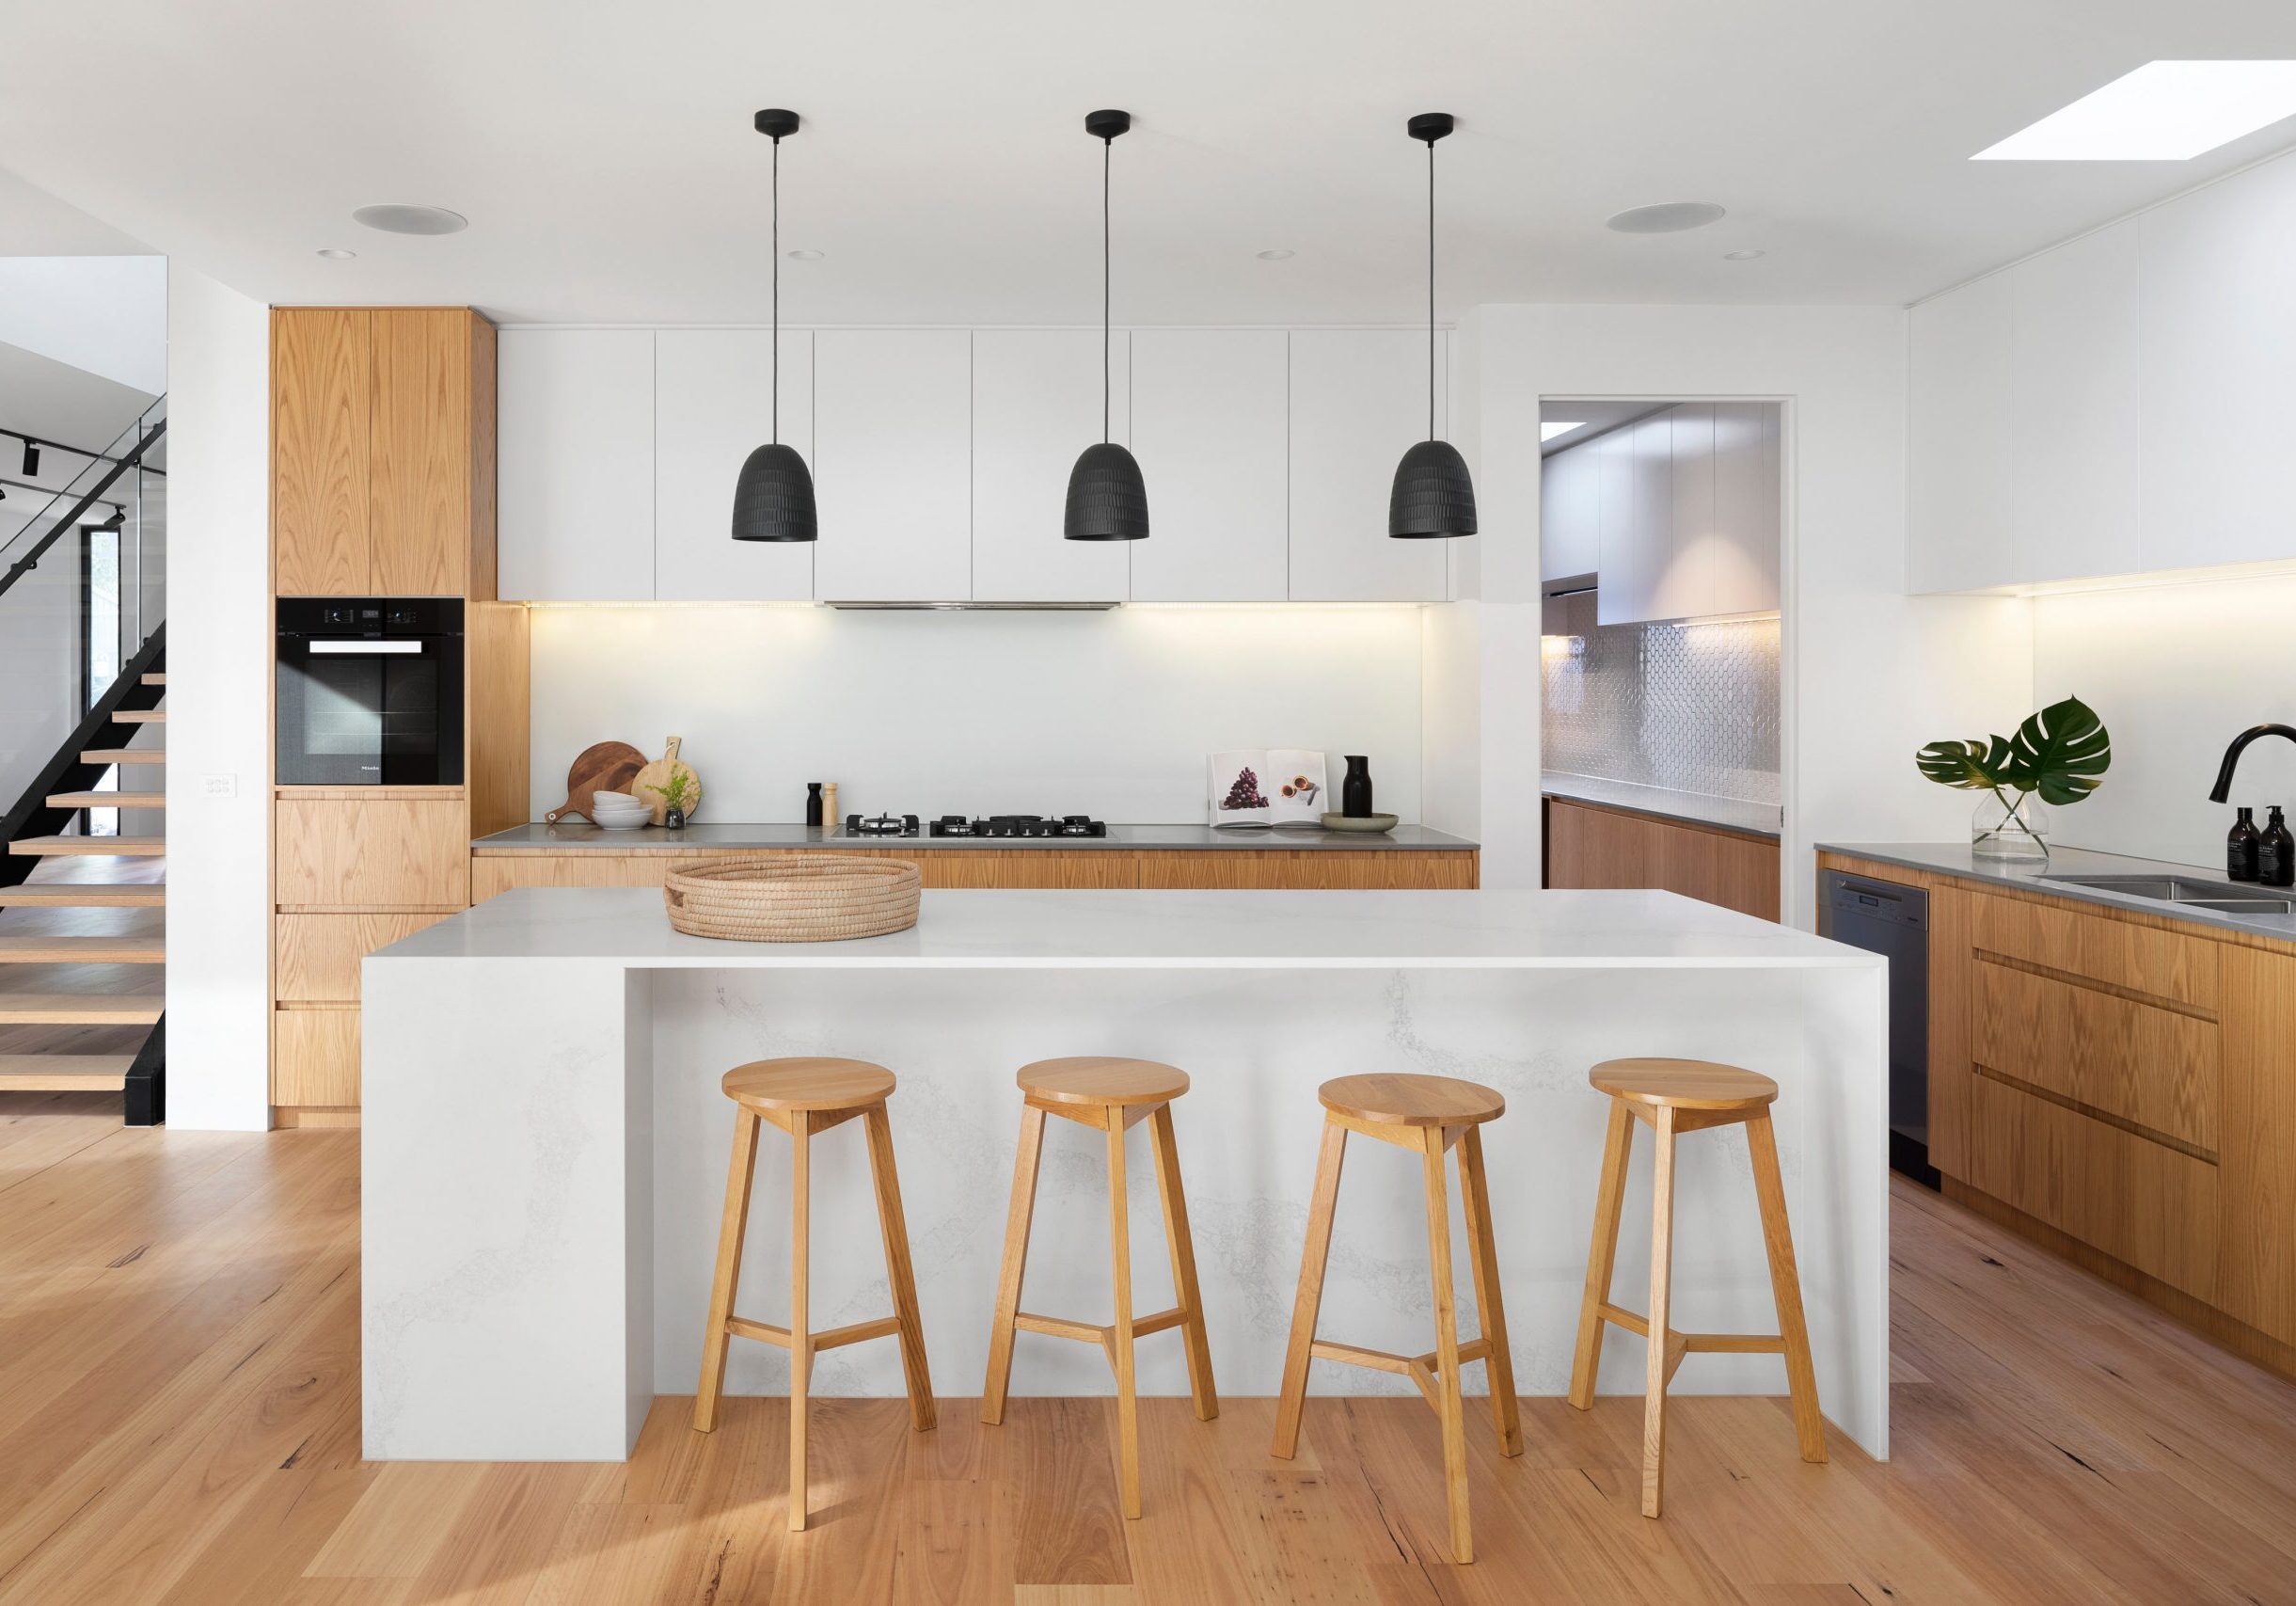 Modern Kitchen area with island and pendant lights